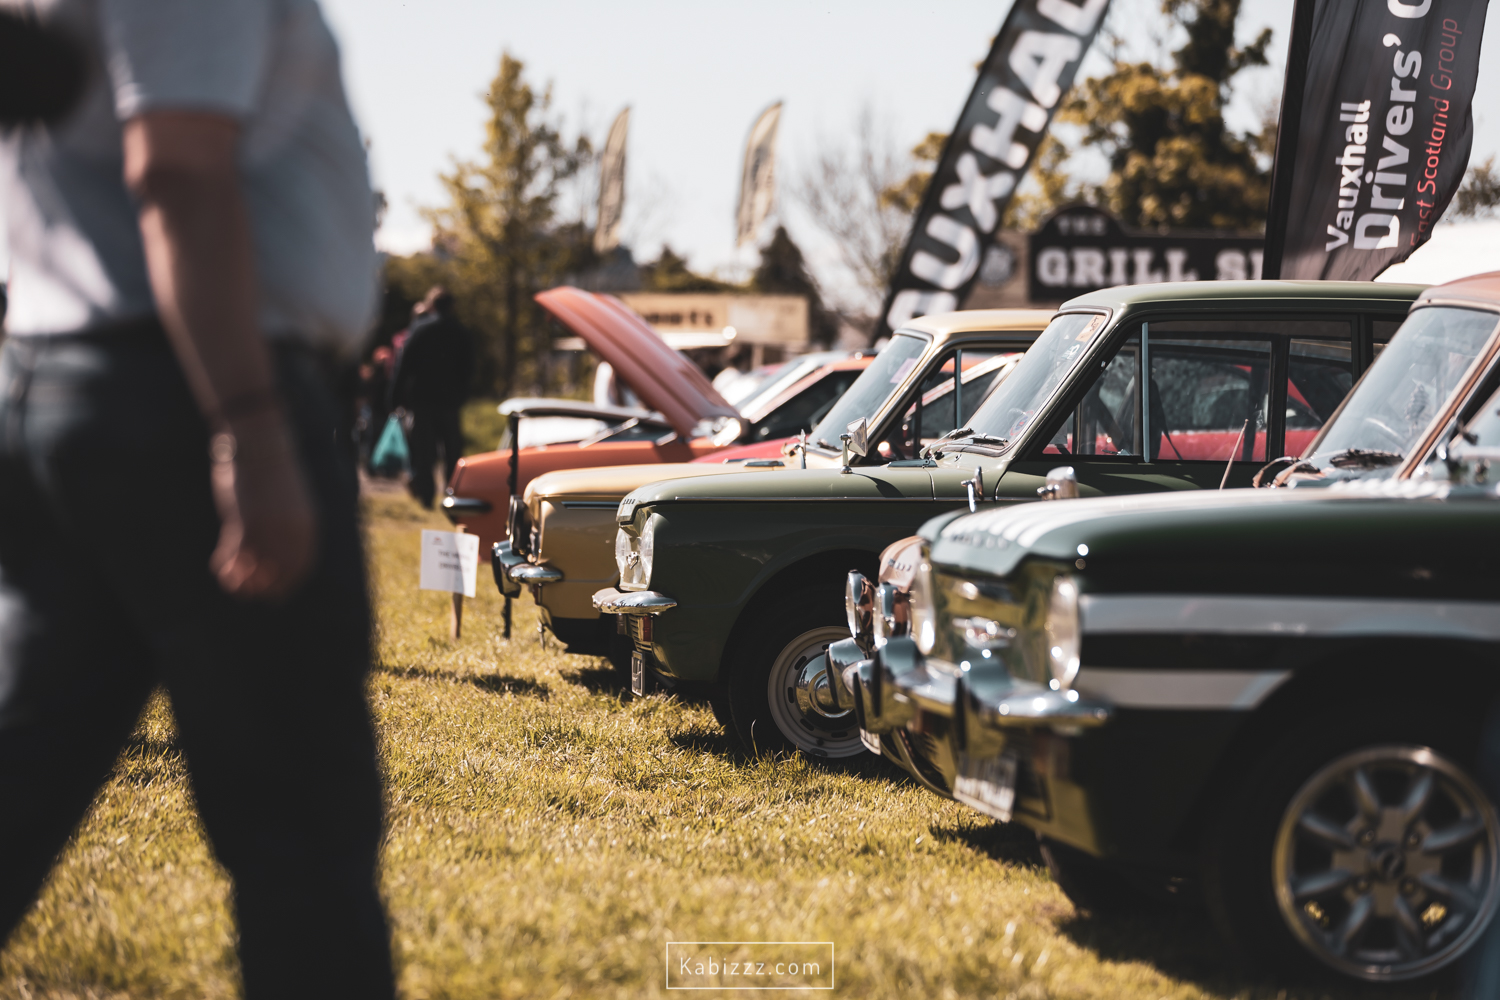 Kabizzz_Photography_Stirling_District_Classic _cars-36.jpg